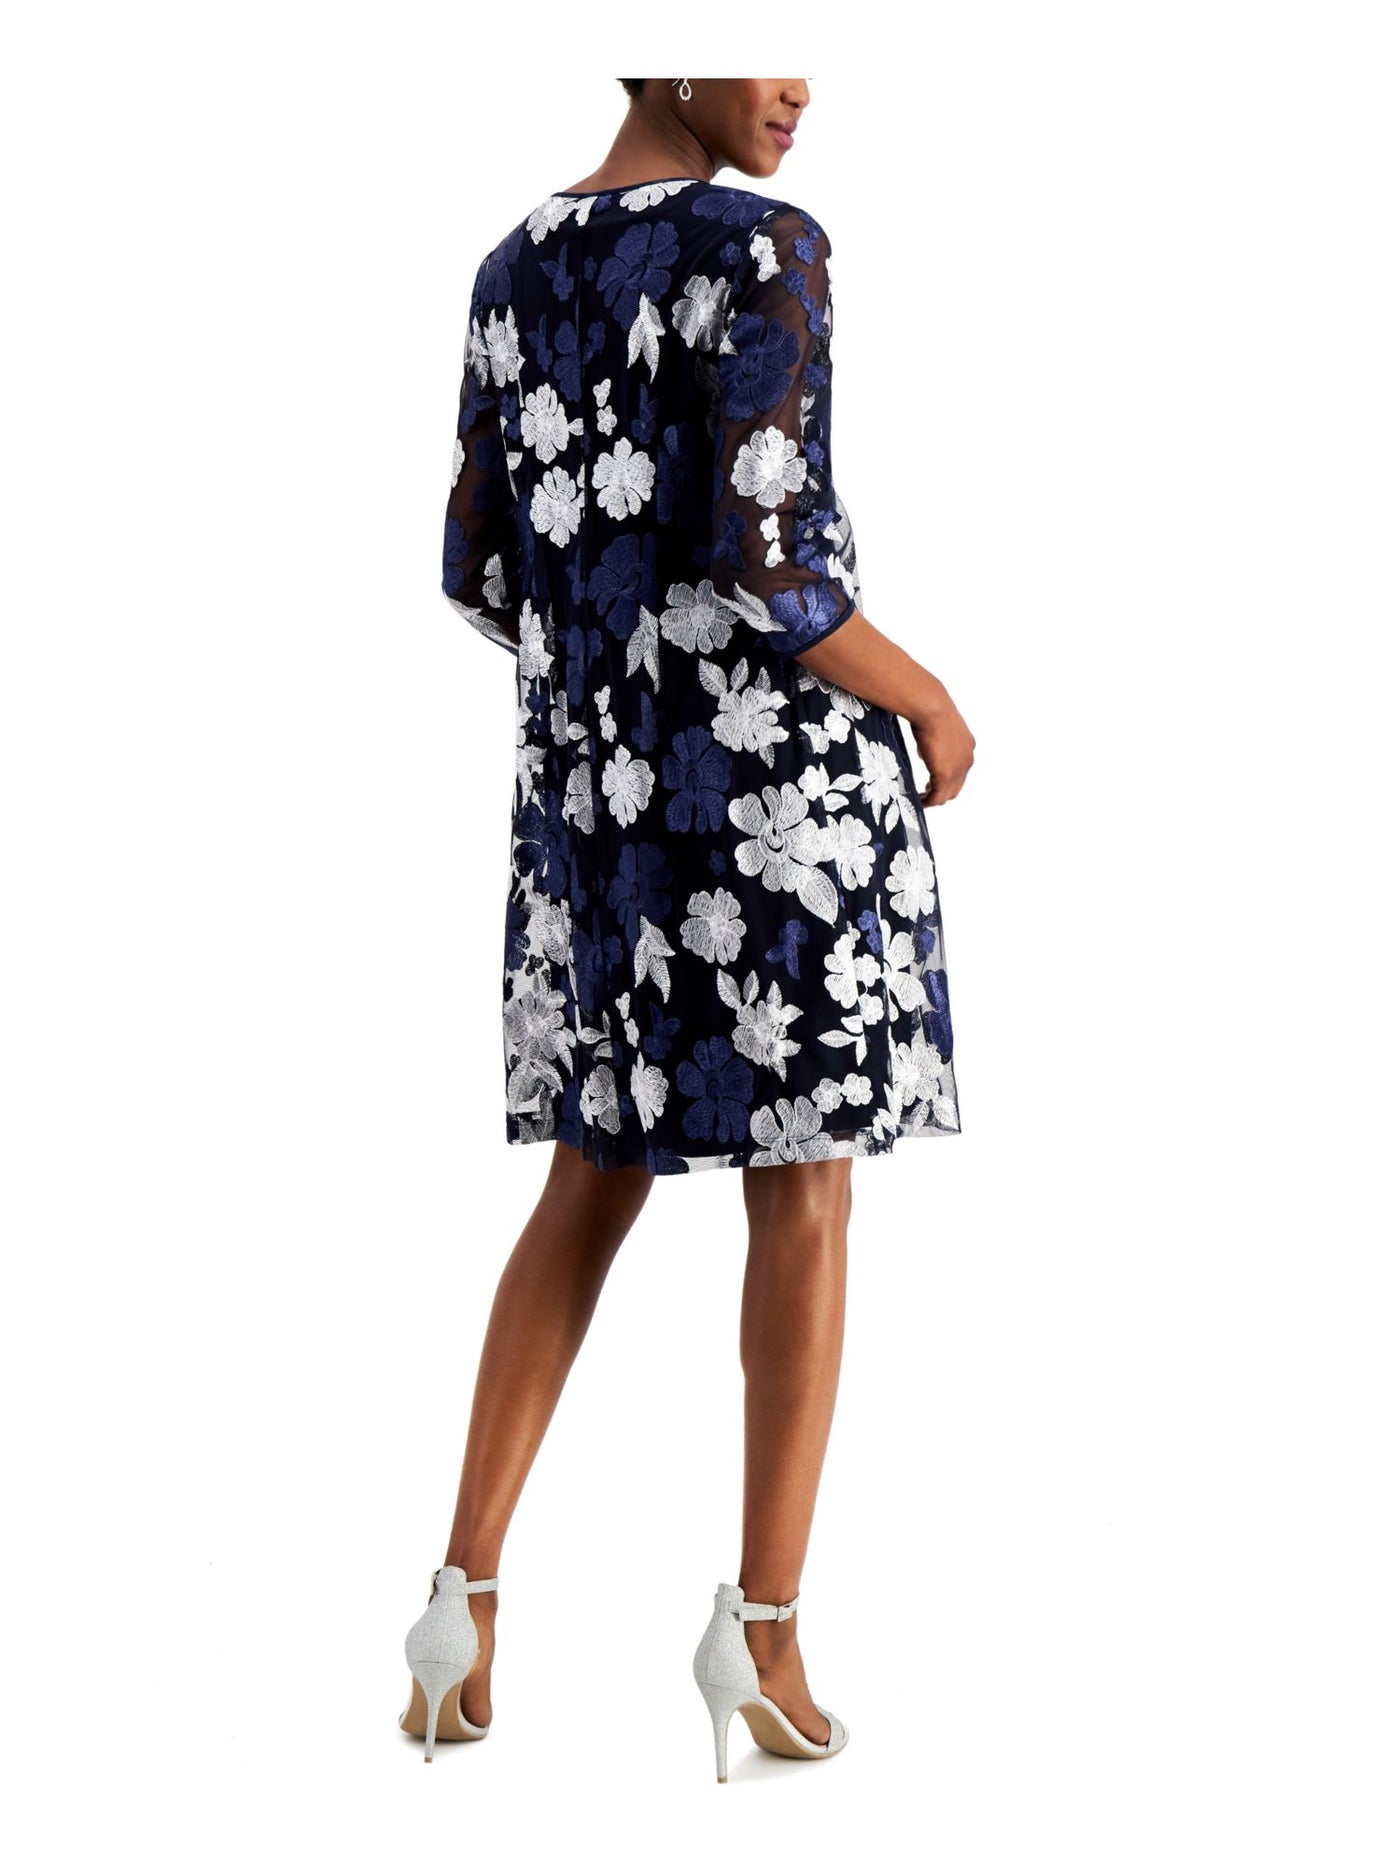 CONNECTED APPAREL Womens Navy Stretch Embroidered Mesh Attached Jacket Unlined Floral 3/4 Sleeve Crew Neck Above The Knee Formal Shift Dress 6